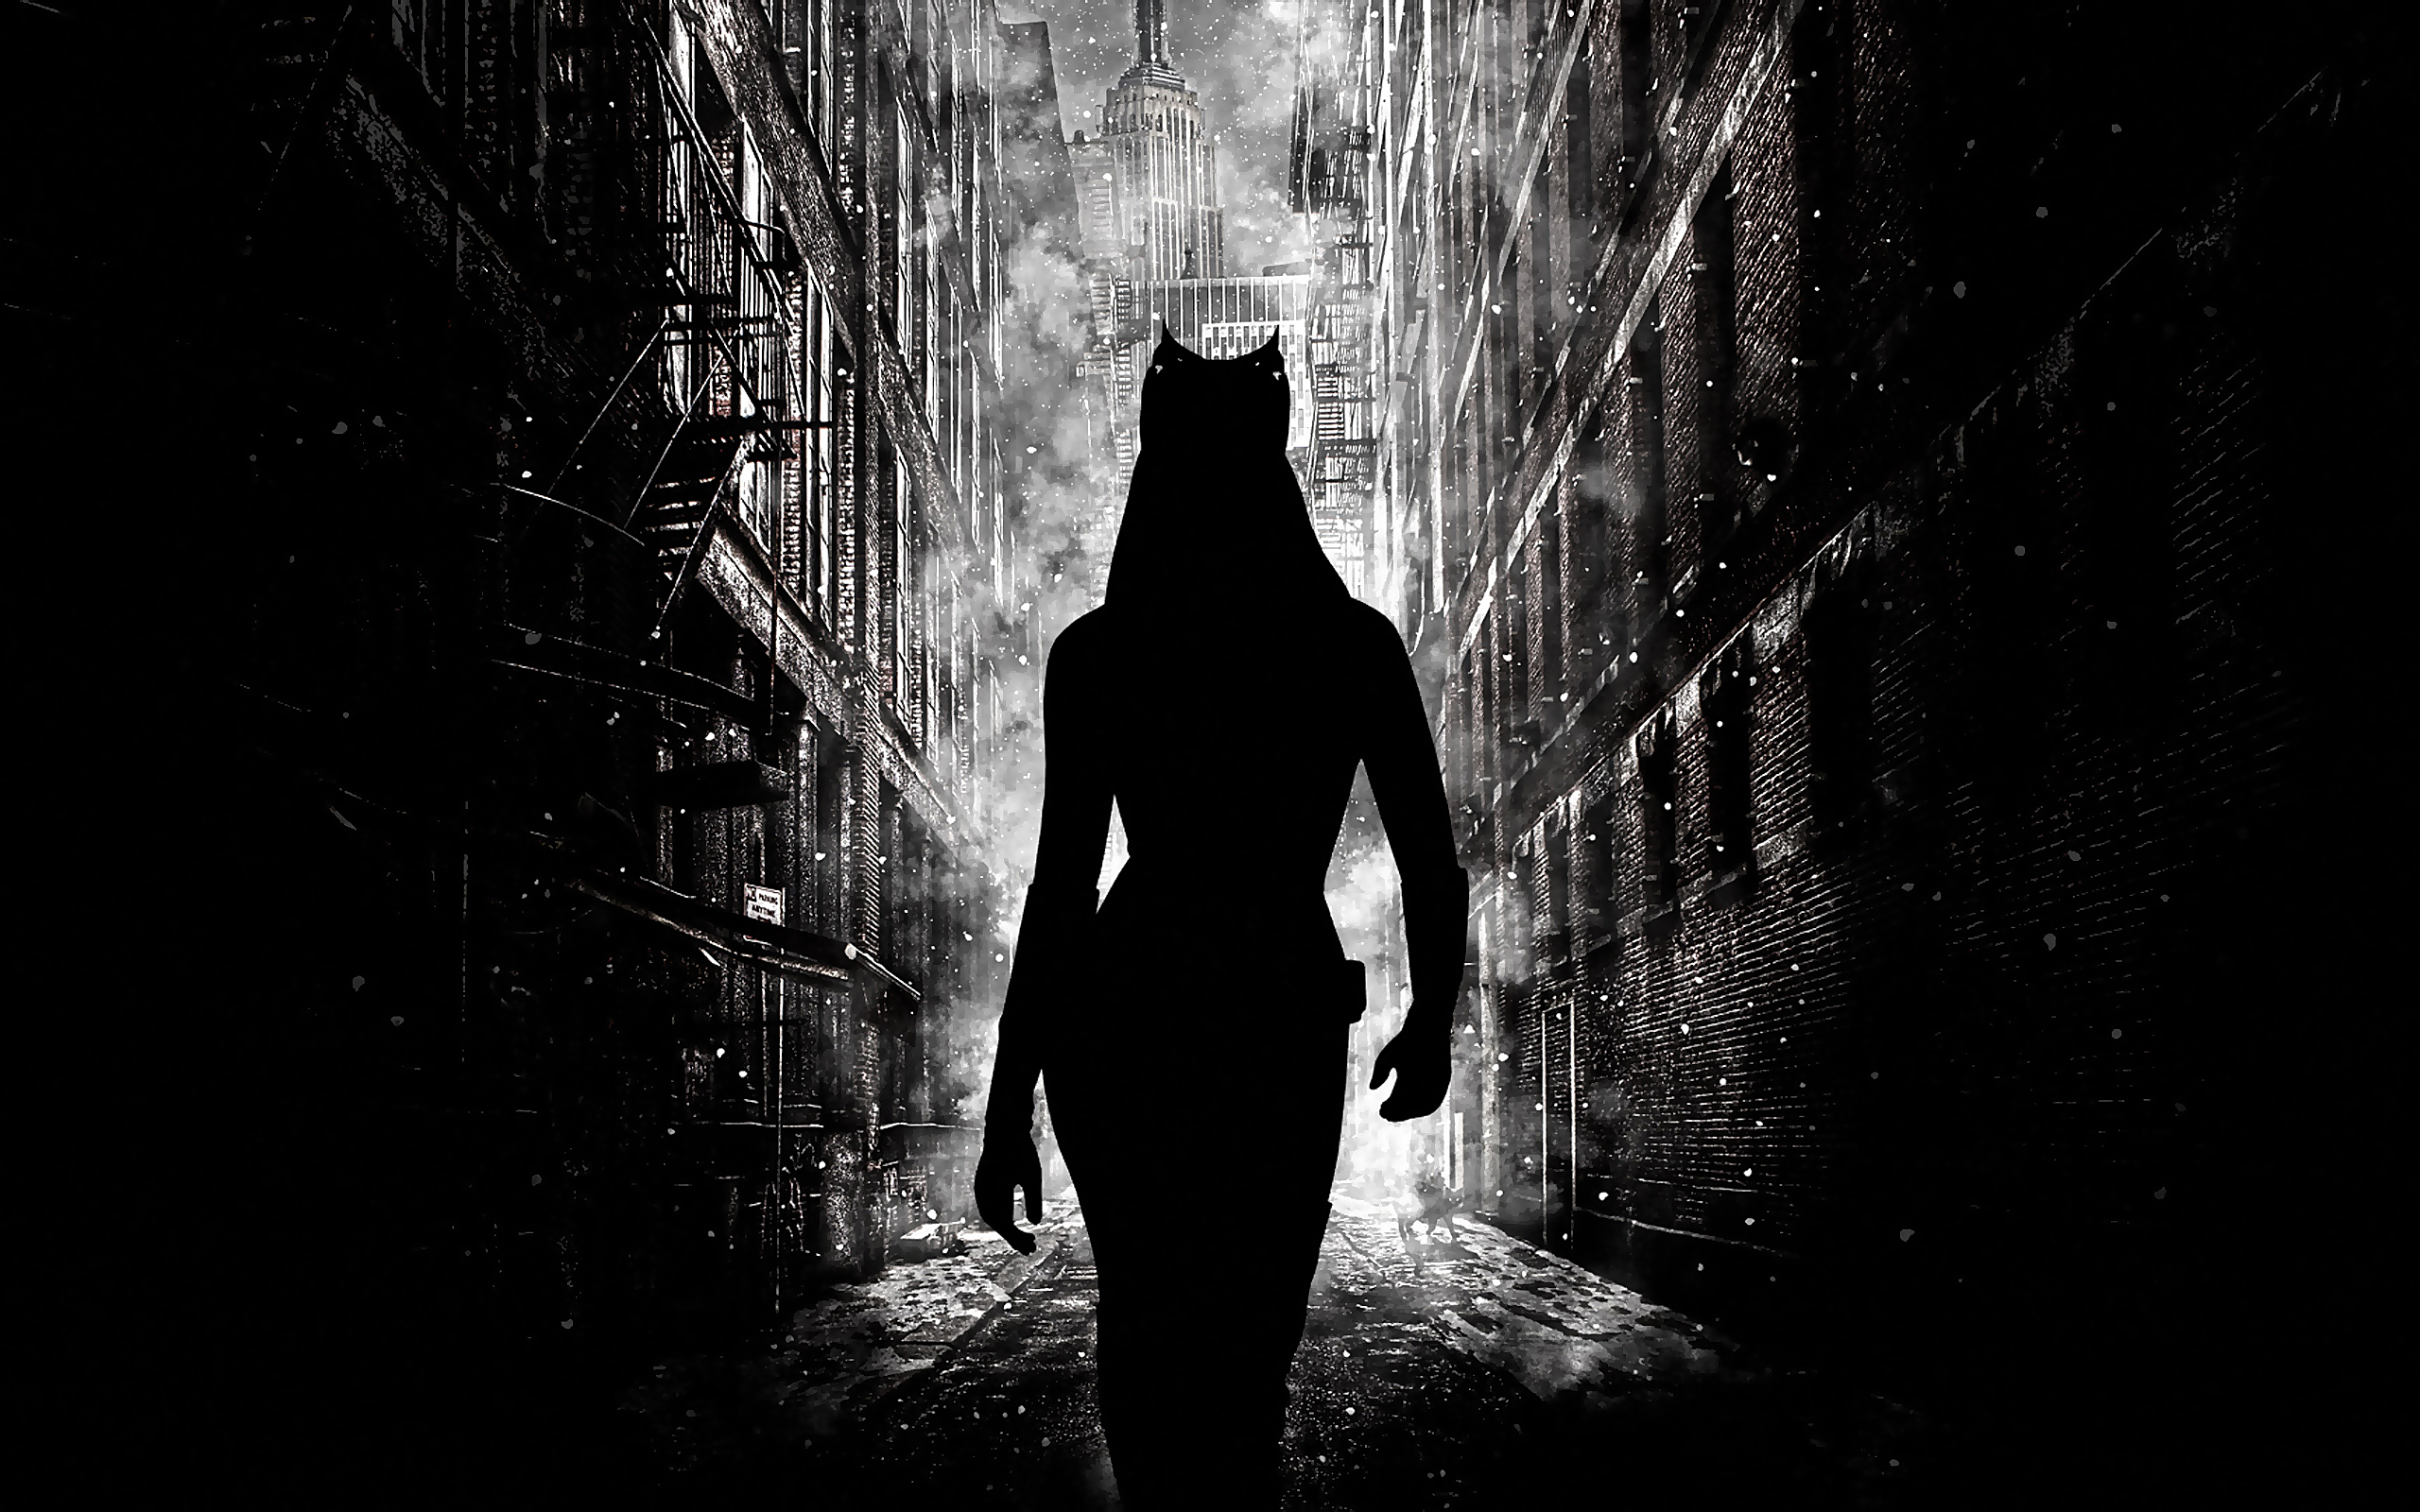 Bw The Dark Knight Rises Catwoman Wallpaper Black And